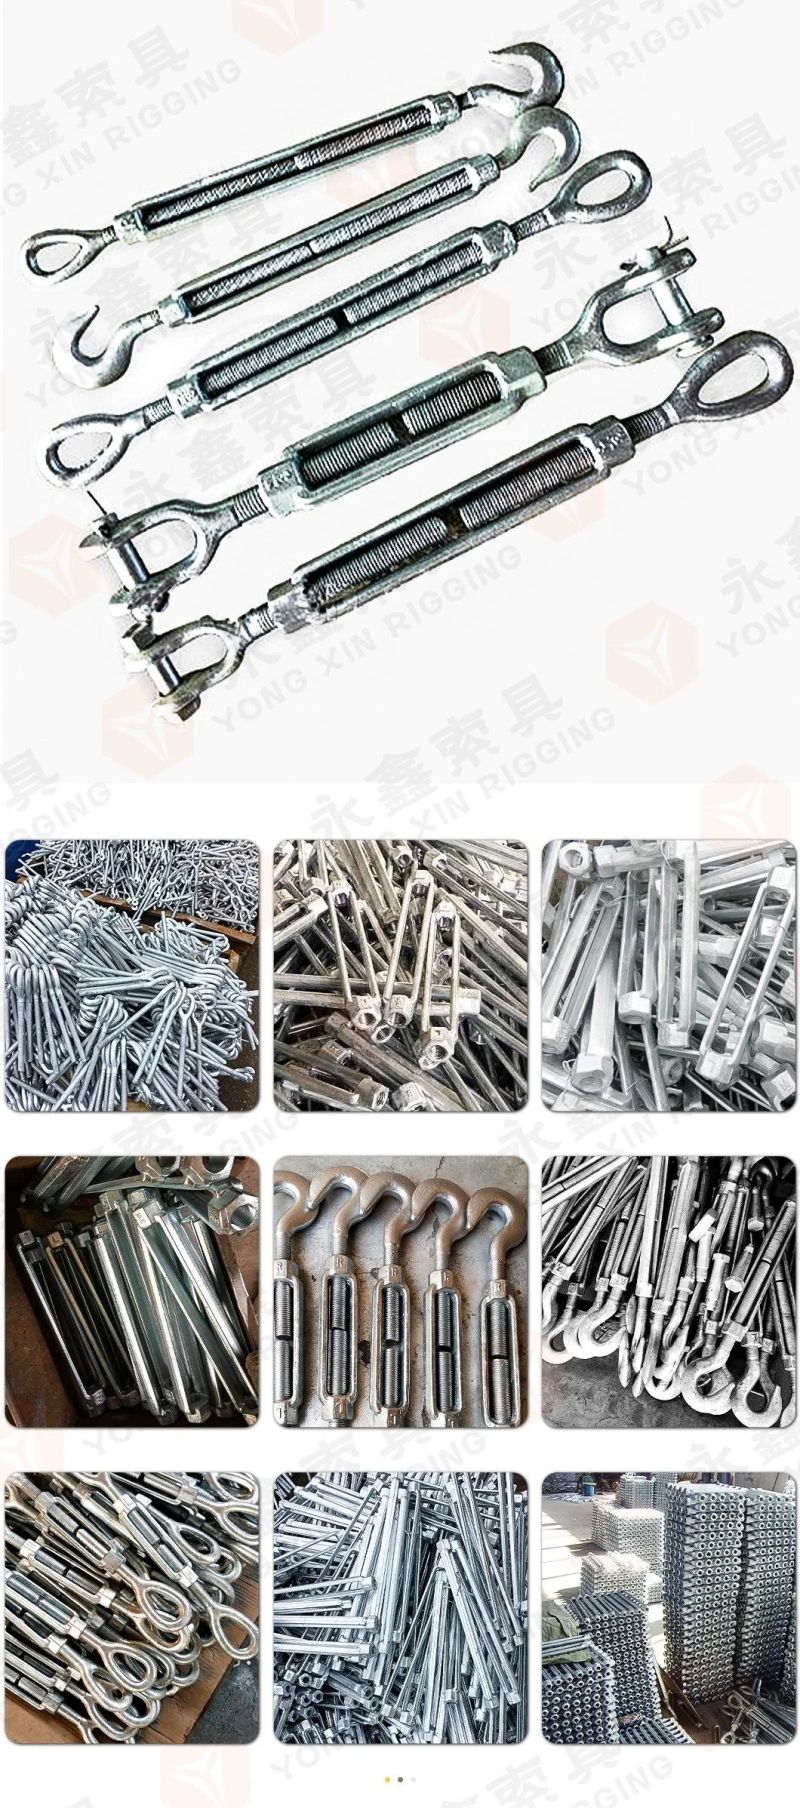 New Arrival Wholesale Stainless Steel High Polished Surface Hook-Hook Turnbuckle